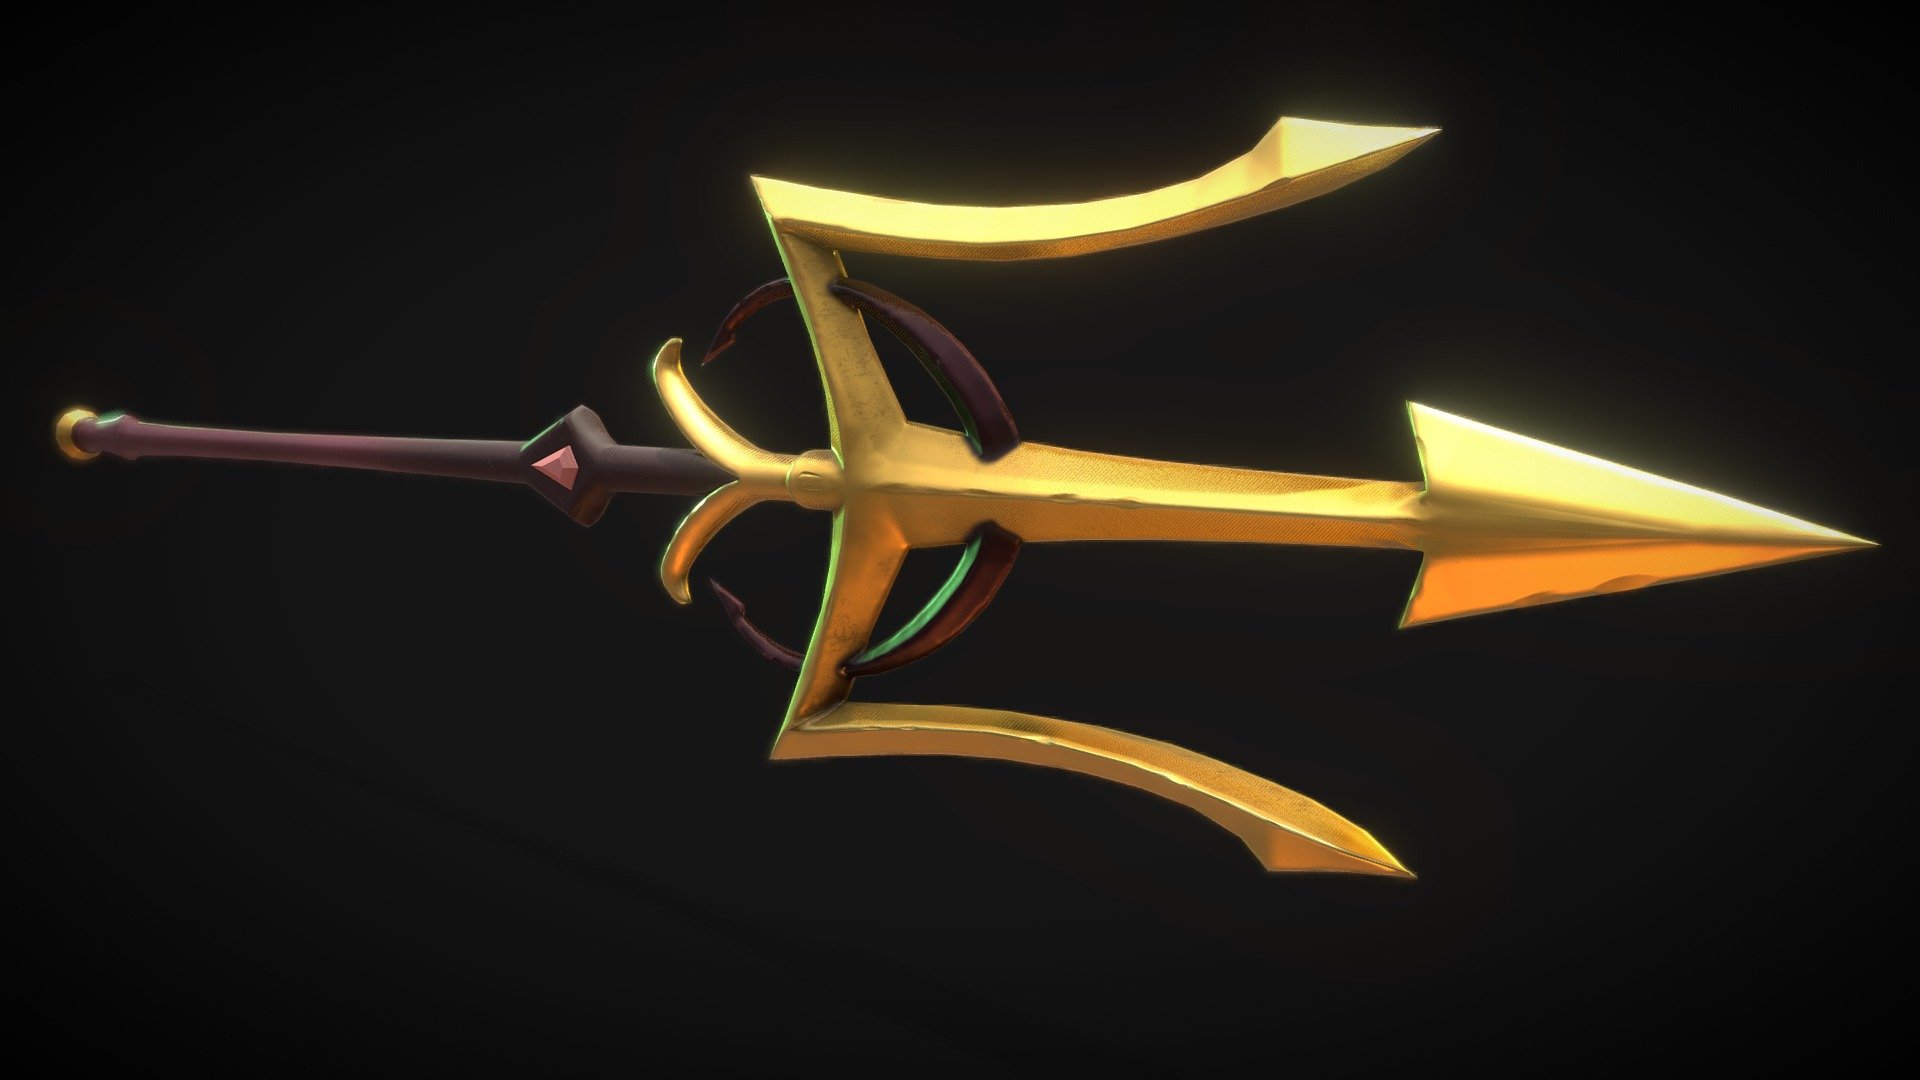 I would be grateful if you appreciate my work))

Thank you!)

Еven more of my works: https://www.artstation.com/lisnik234 - Stylized trident - Download Free 3D model by Lisnik234 3d model